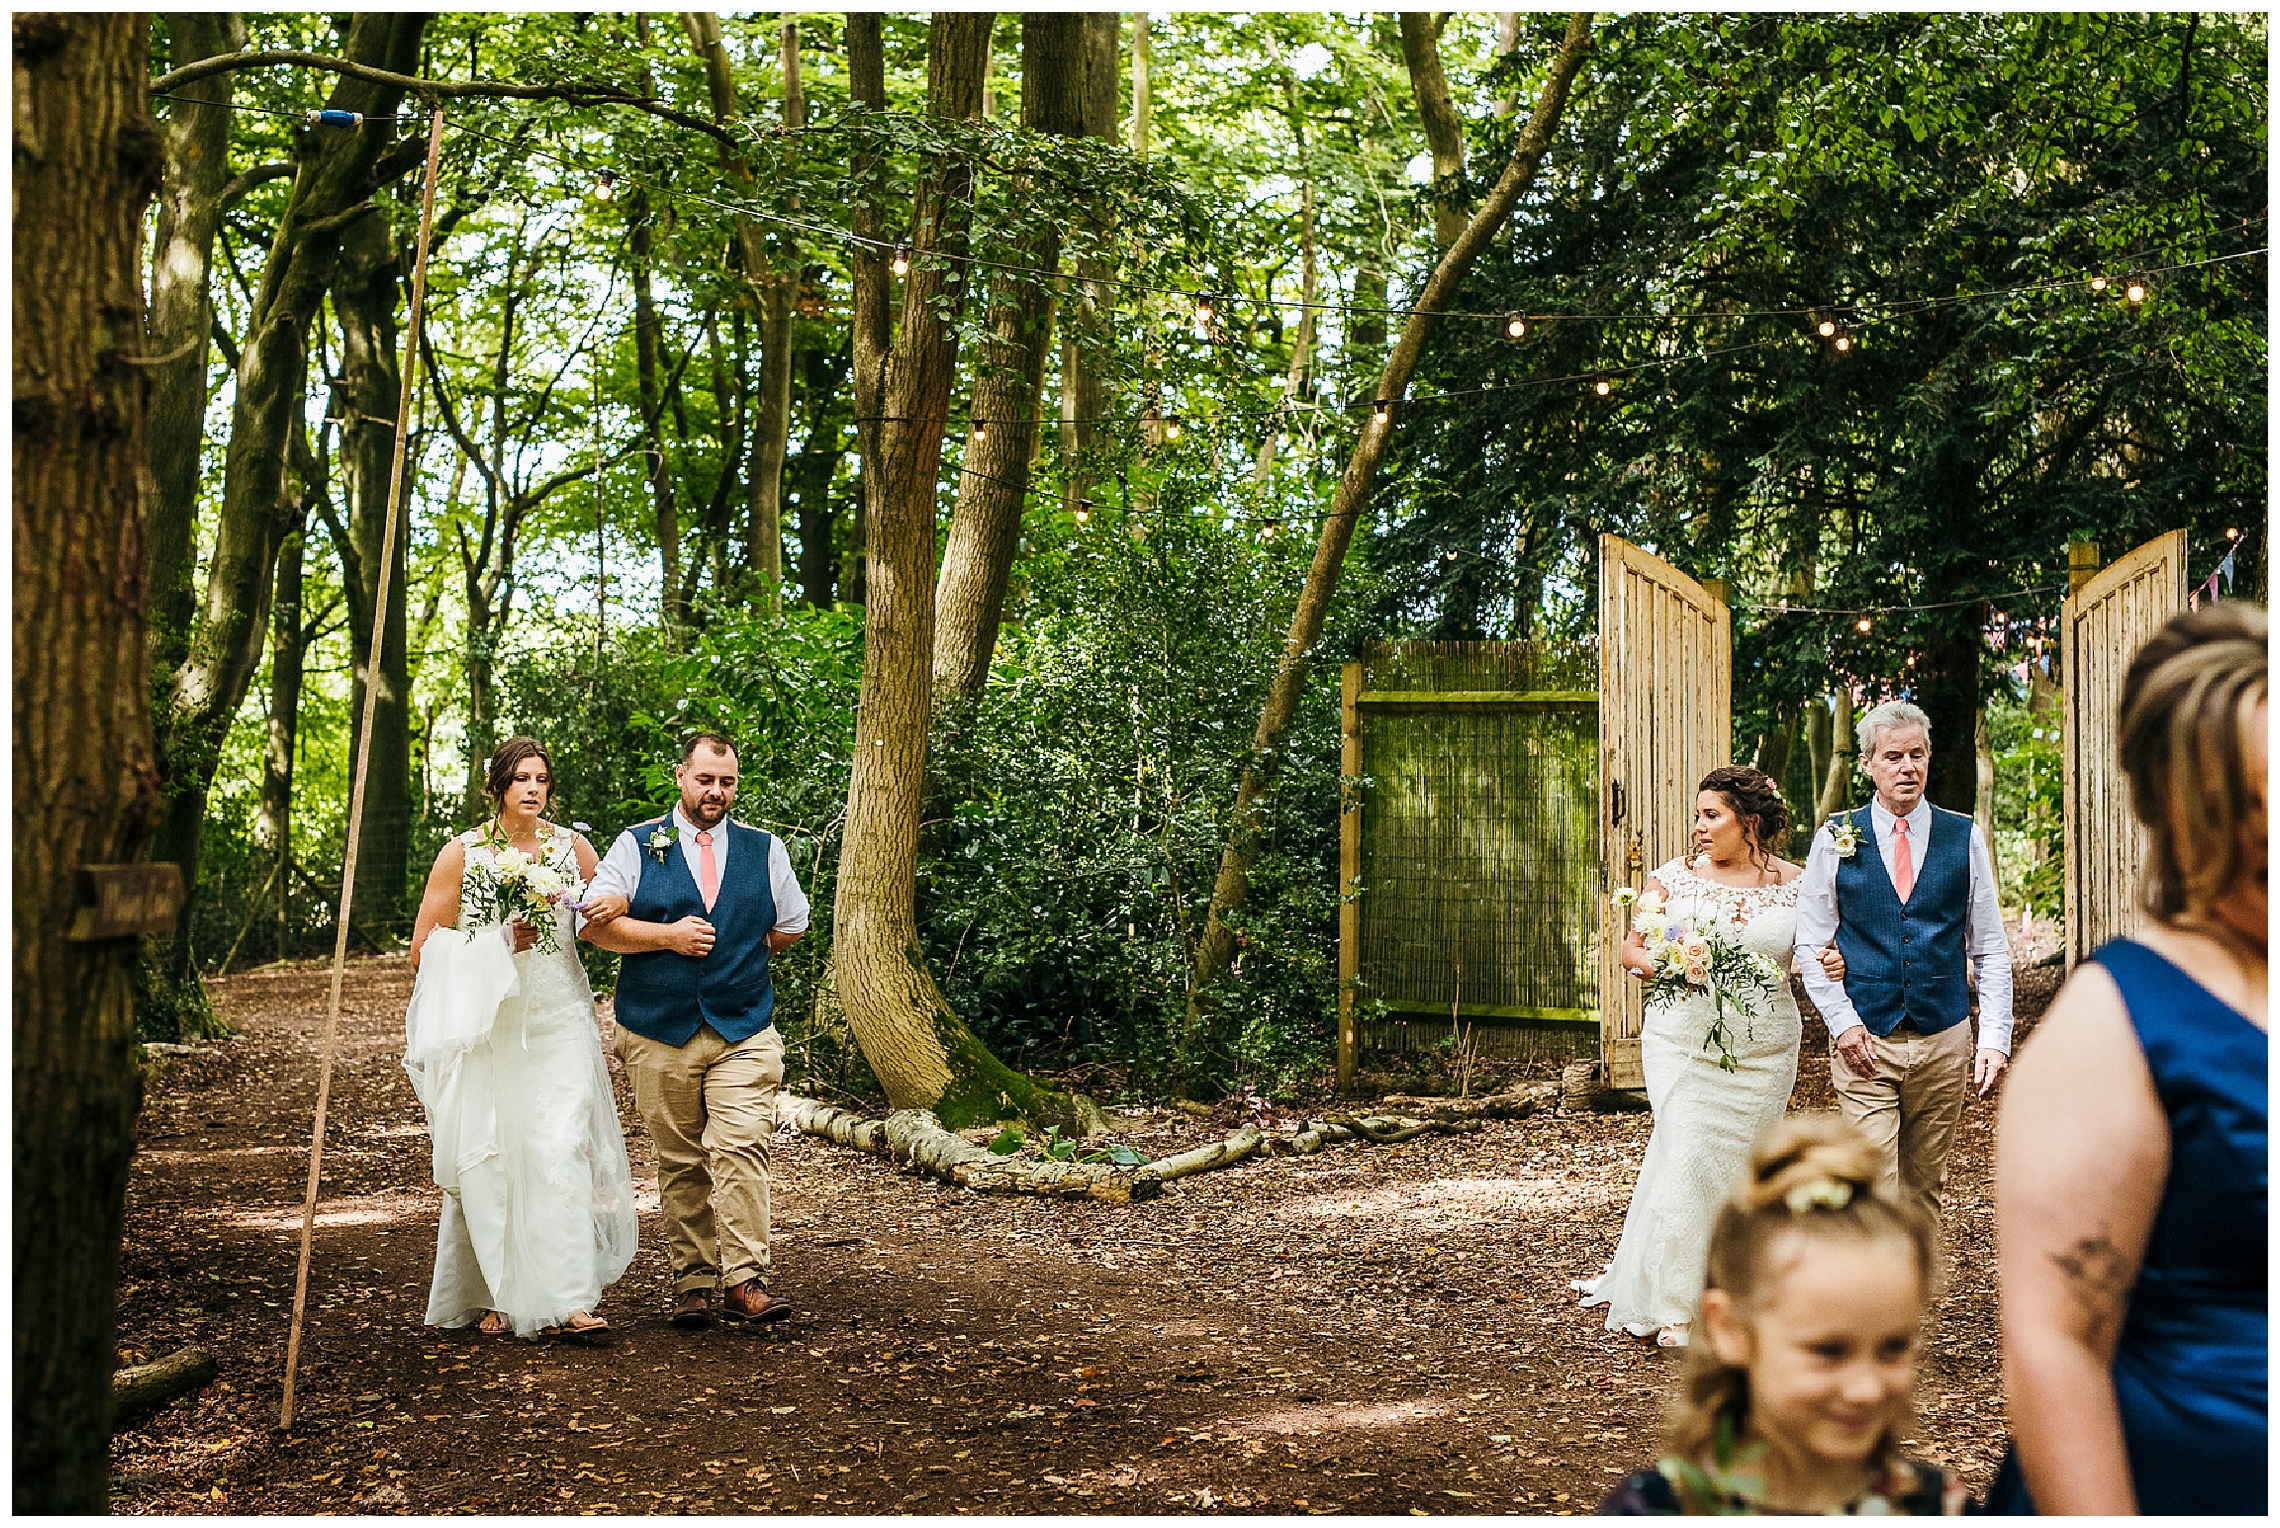 brides walking towards one another at outdoor setting lilas wood